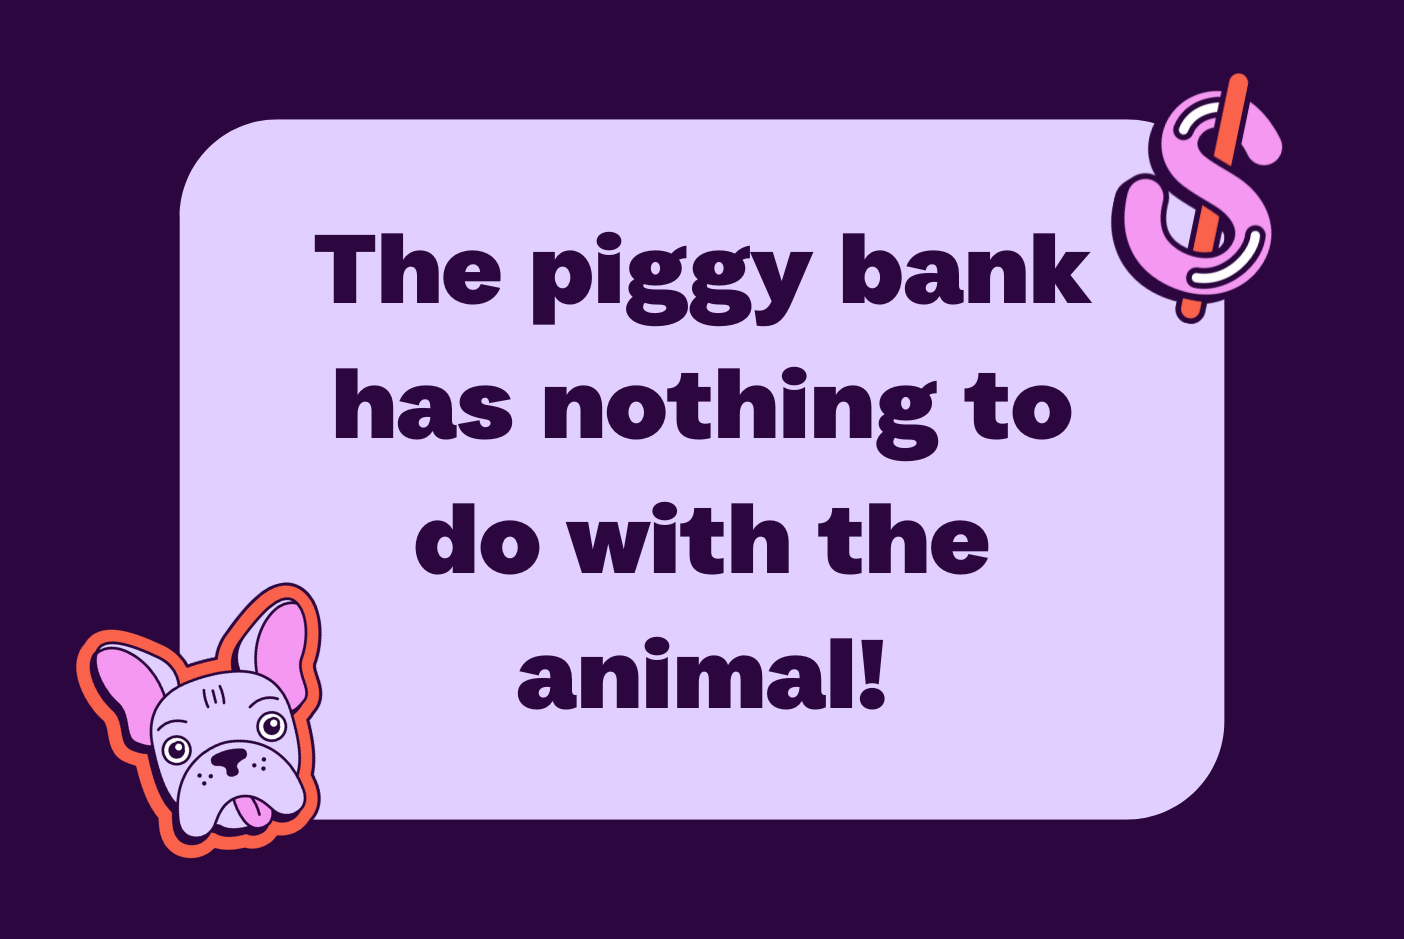 Fun fact: The piggy bank has nothing to do with the animal!